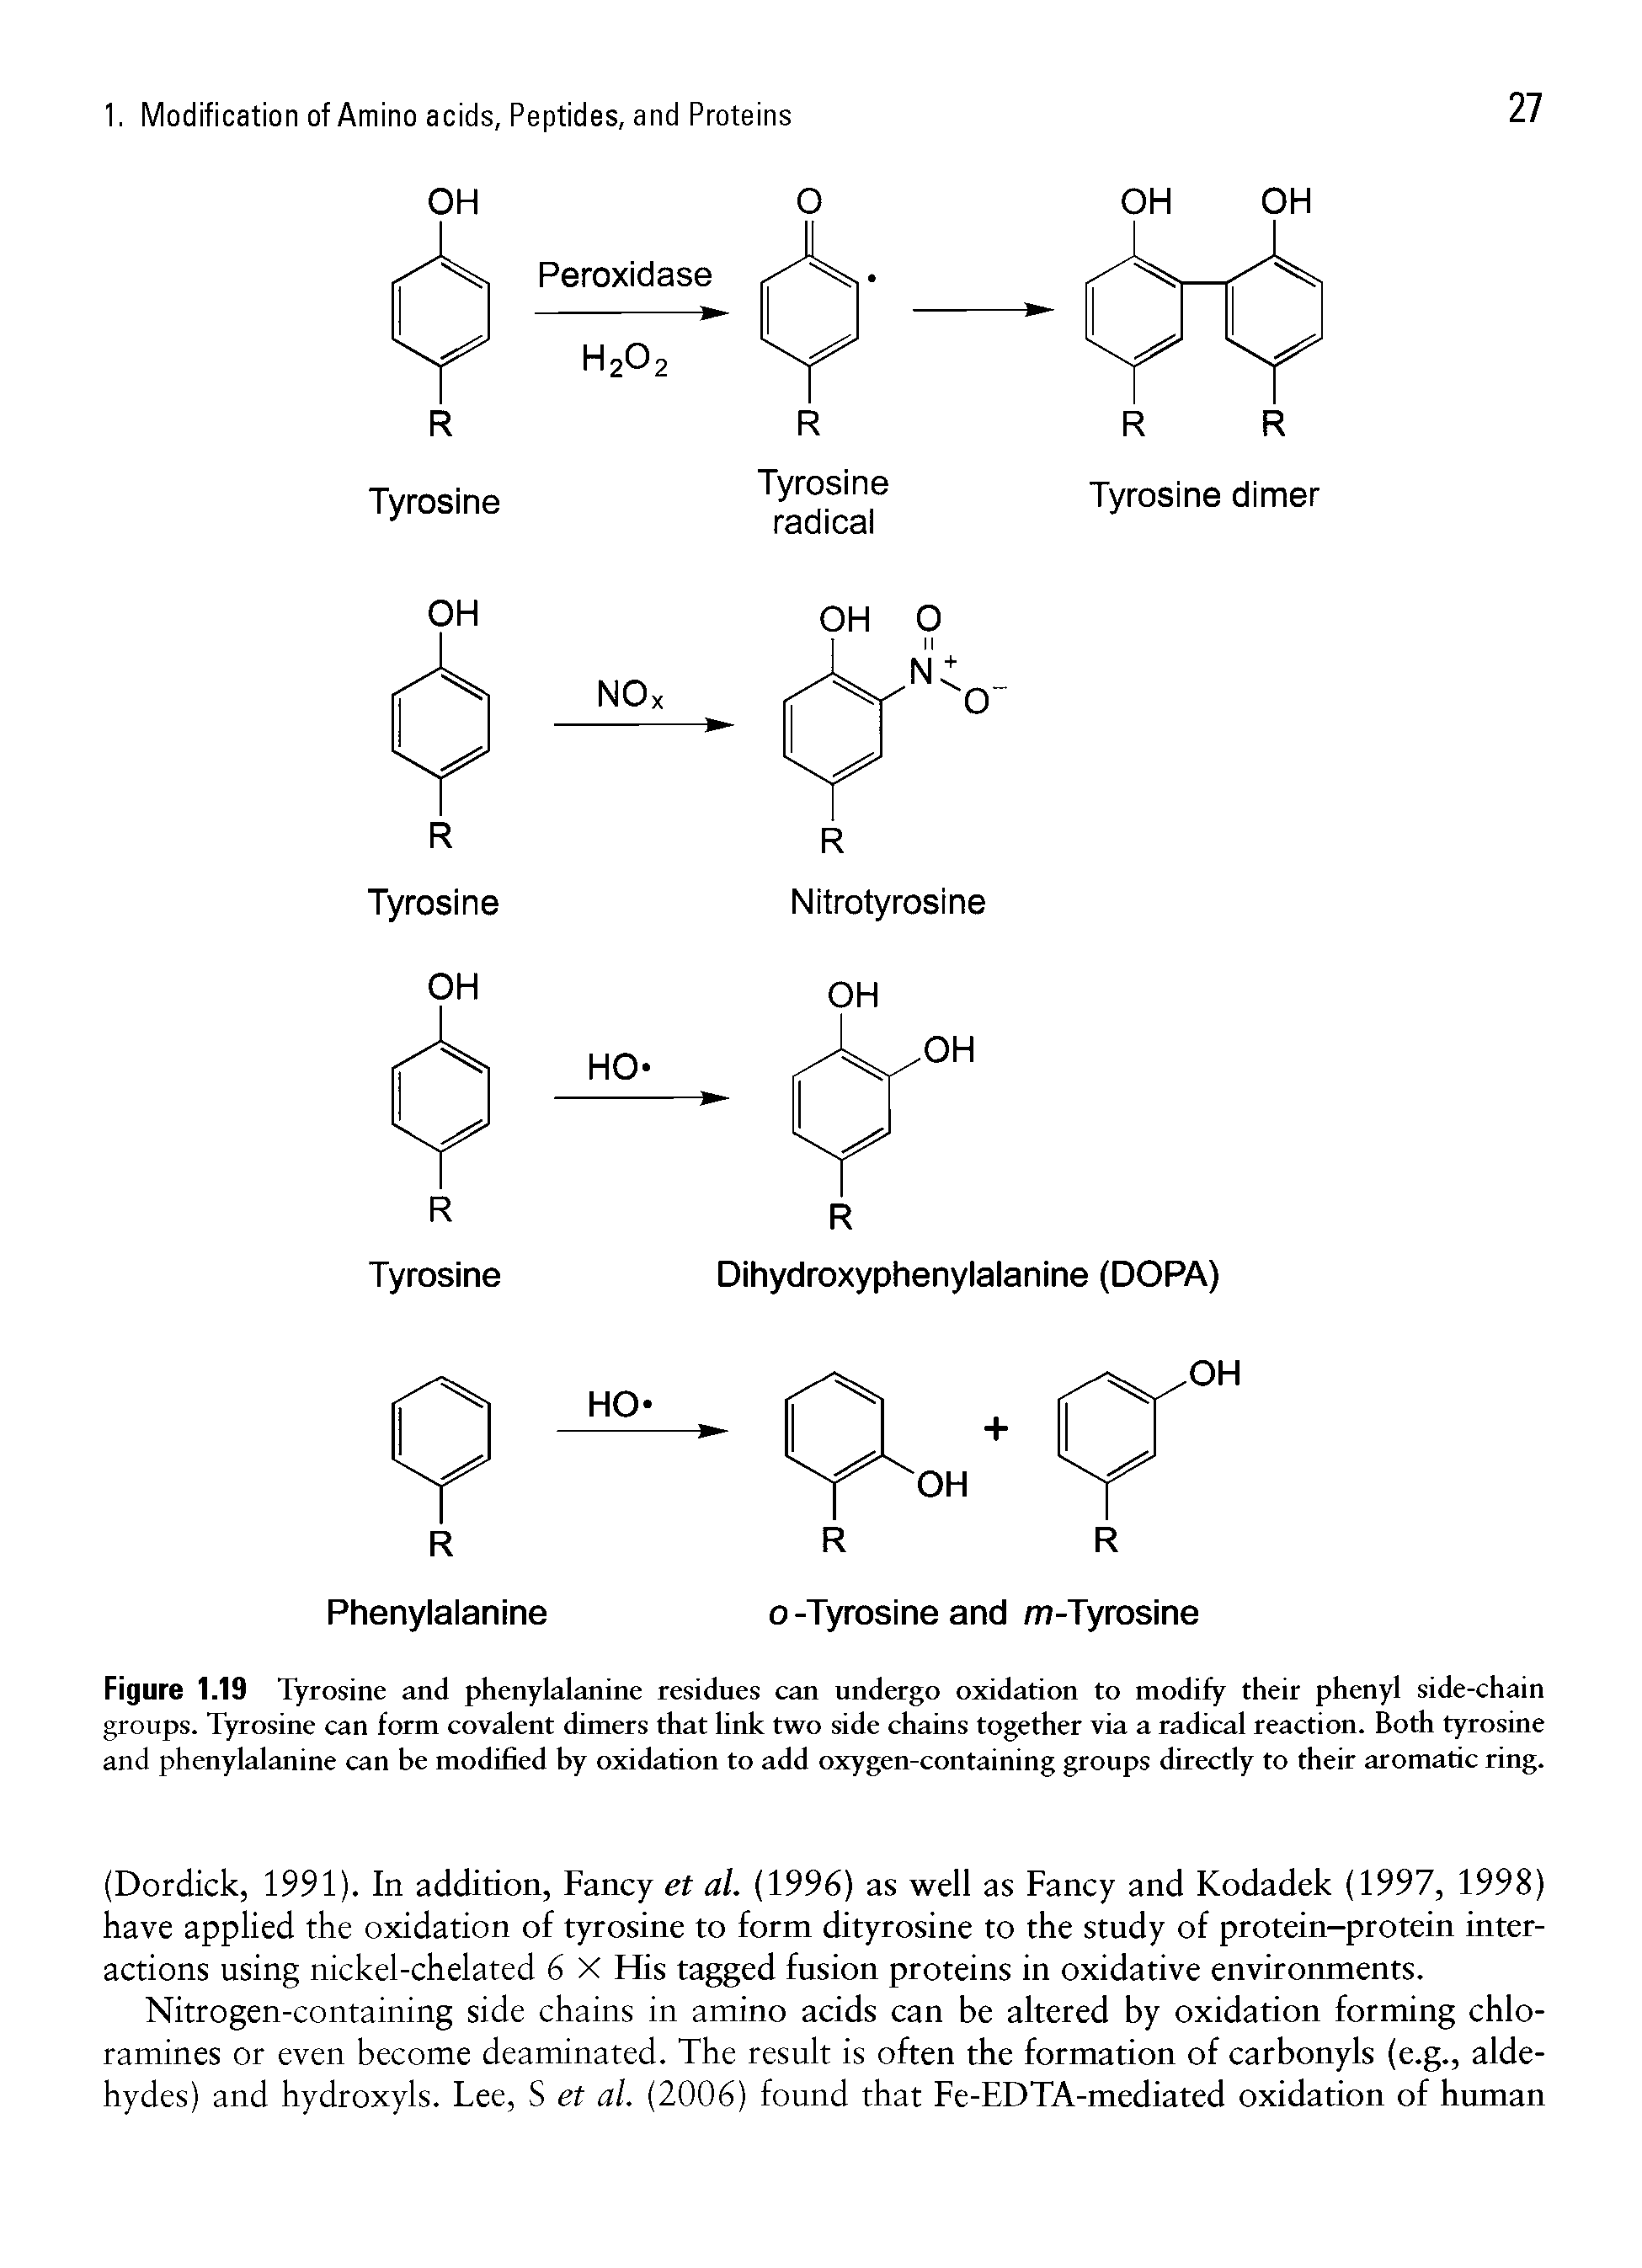 Figure 1.19 Tyrosine and phenylalanine residues can undergo oxidation to modify their phenyl side-chain groups. Tyrosine can form covalent dimers that link two side chains together via a radical reaction. Both tyrosine and phenylalanine can be modified by oxidation to add oxygen-containing groups directly to their aromatic ring.